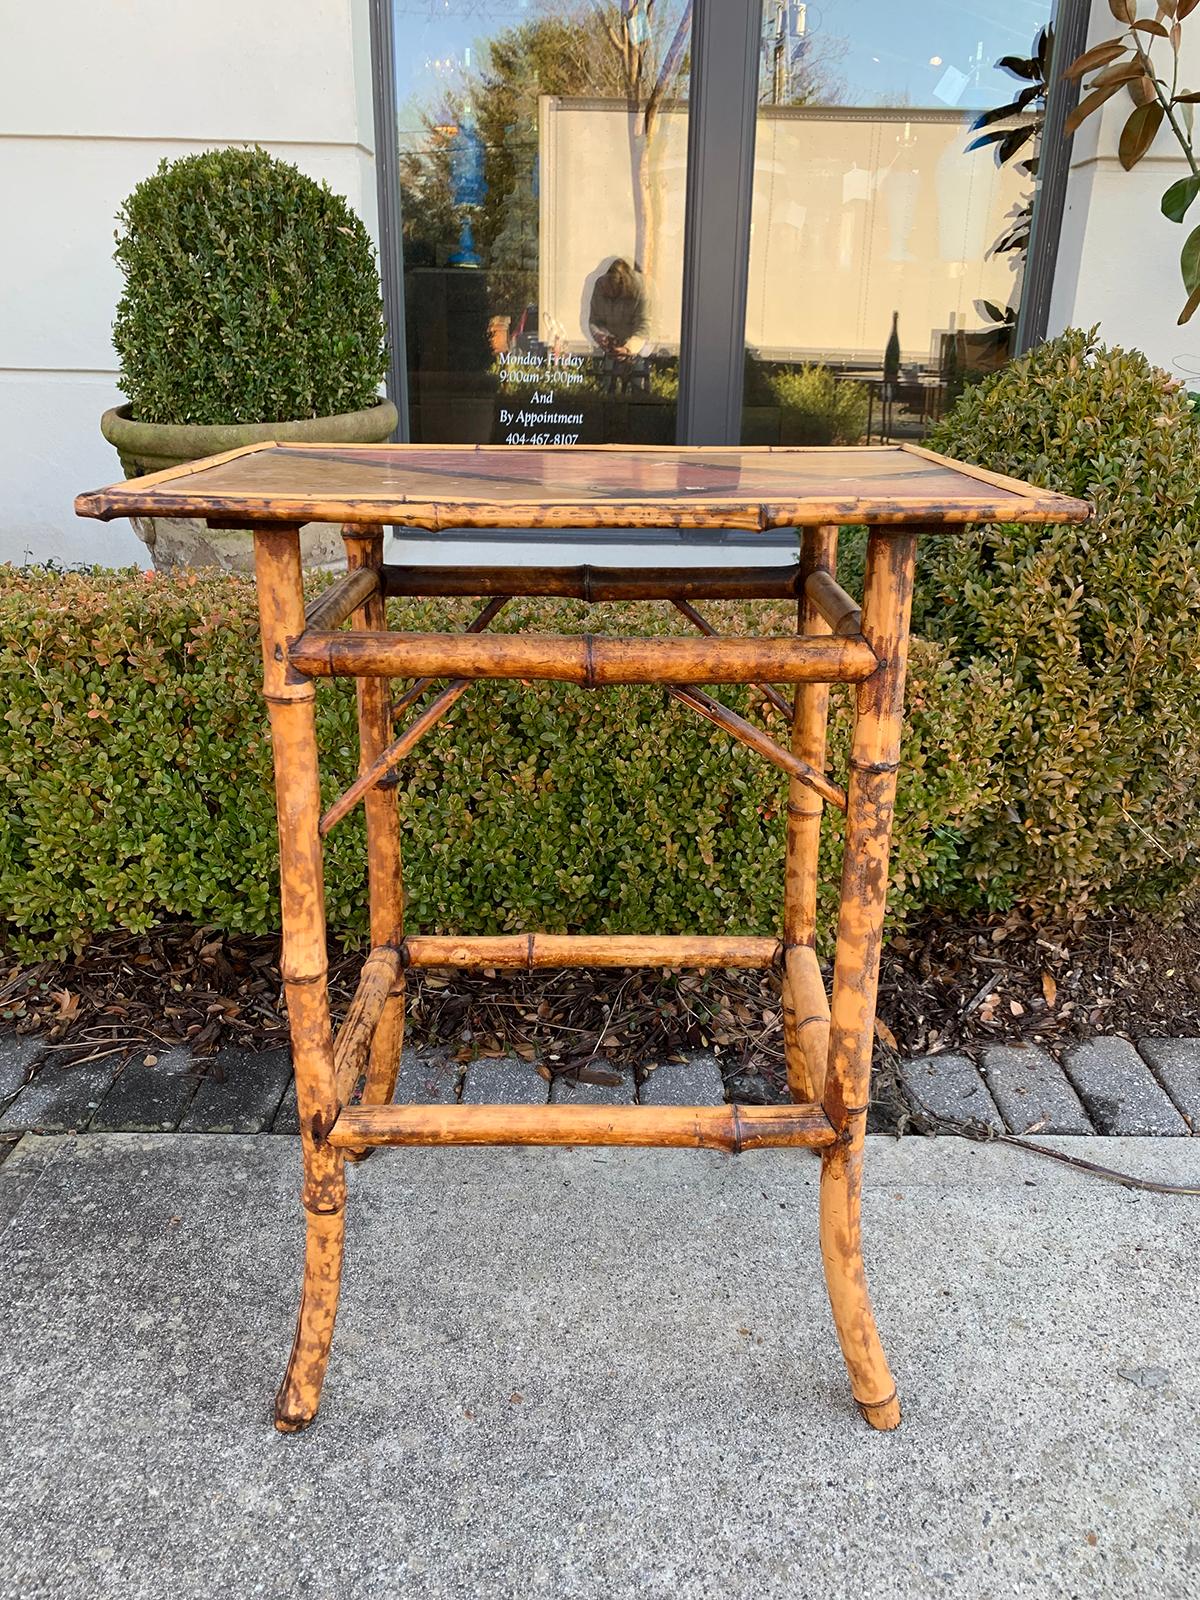 Late 19th-early 20th century bamboo side table.